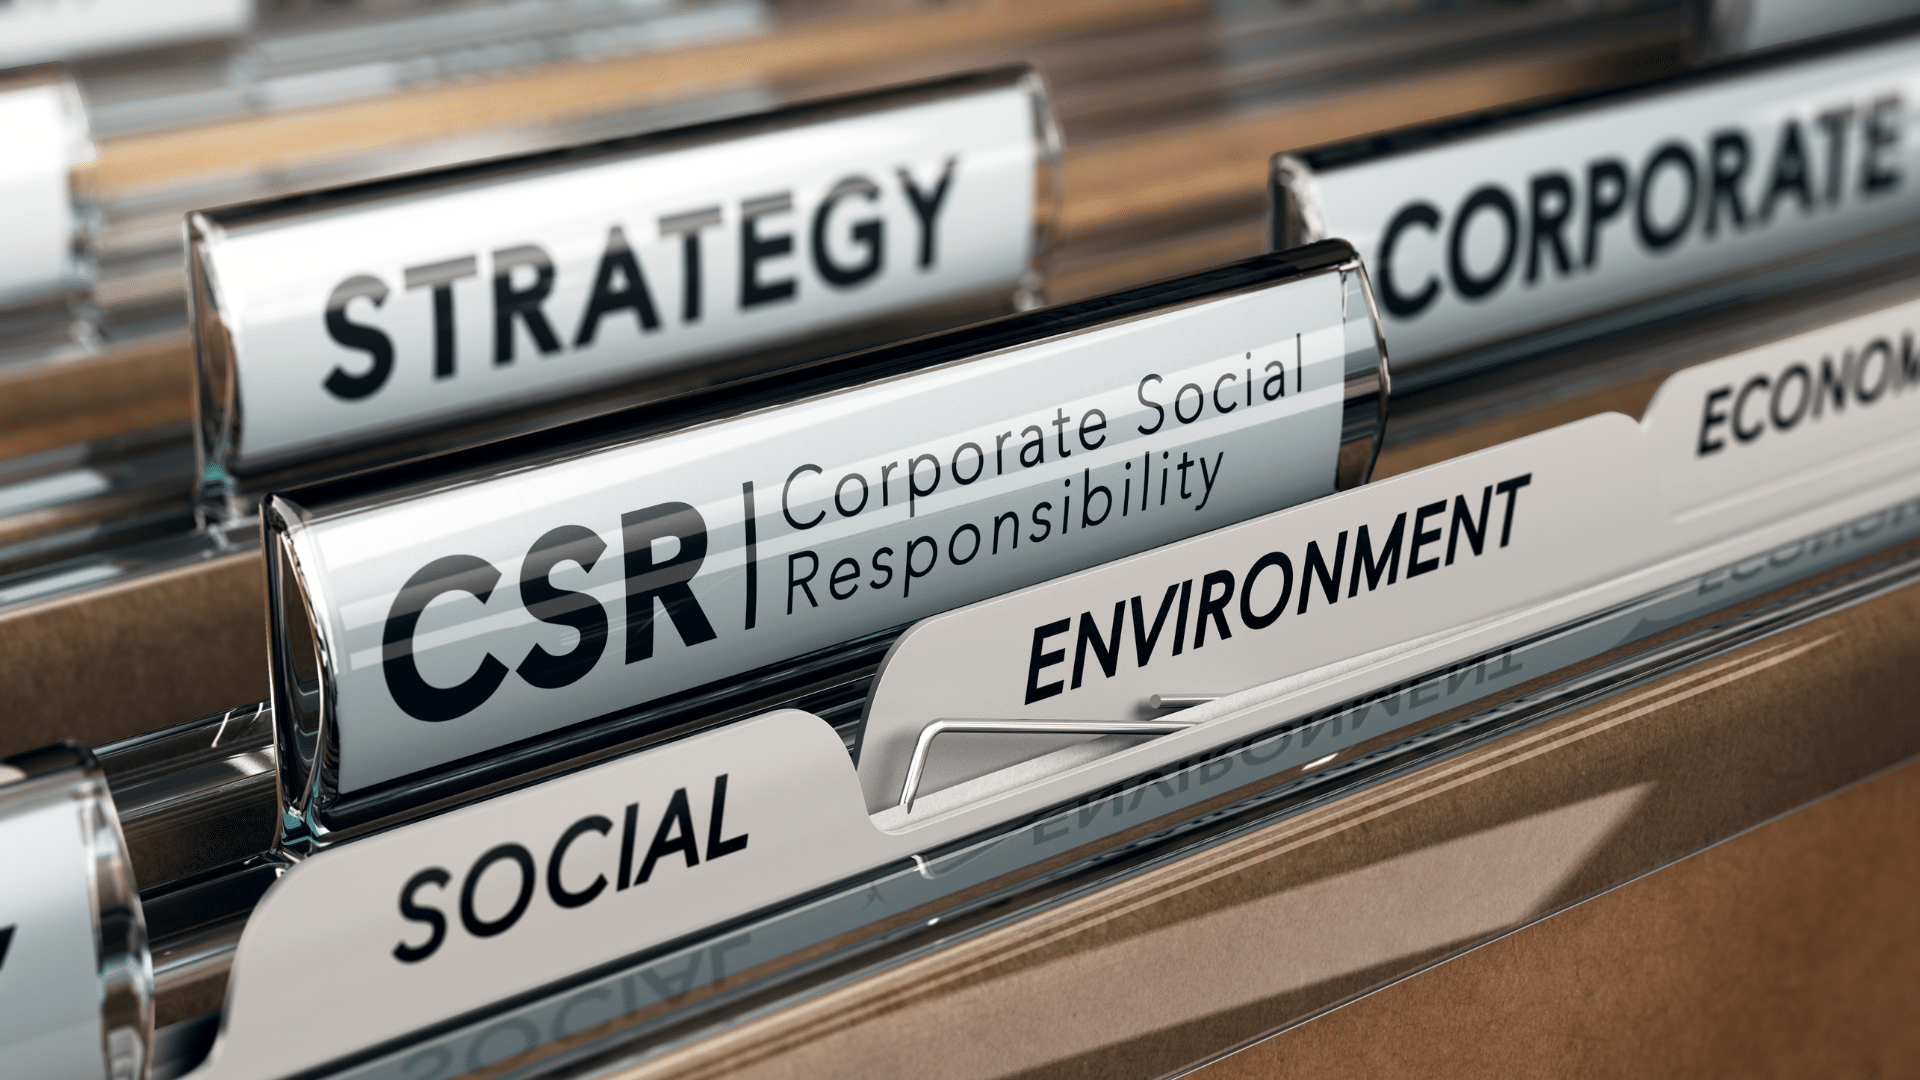 Files showing steps to sustainability for businesses